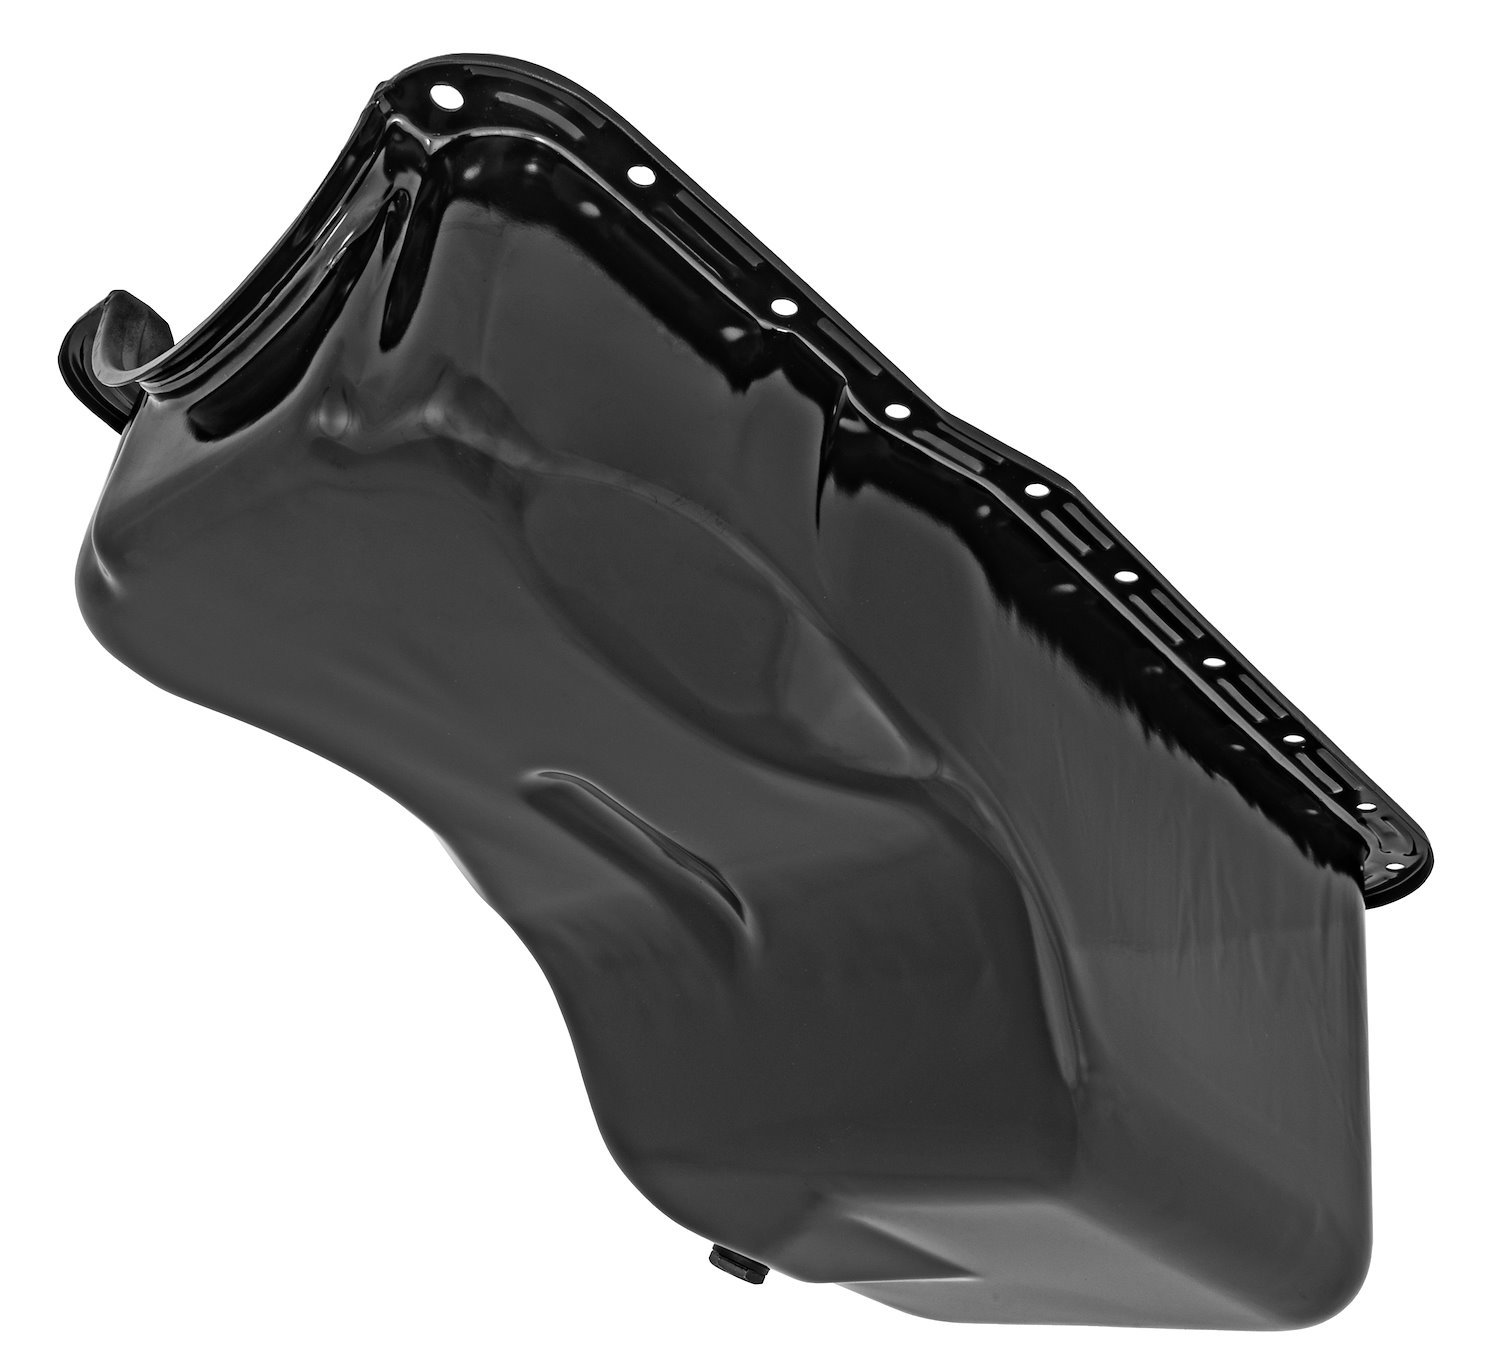 Stock-Style Replacement Oil Pan for 1967-1981 Small Block Ford 351W Passenger Cars [Black]